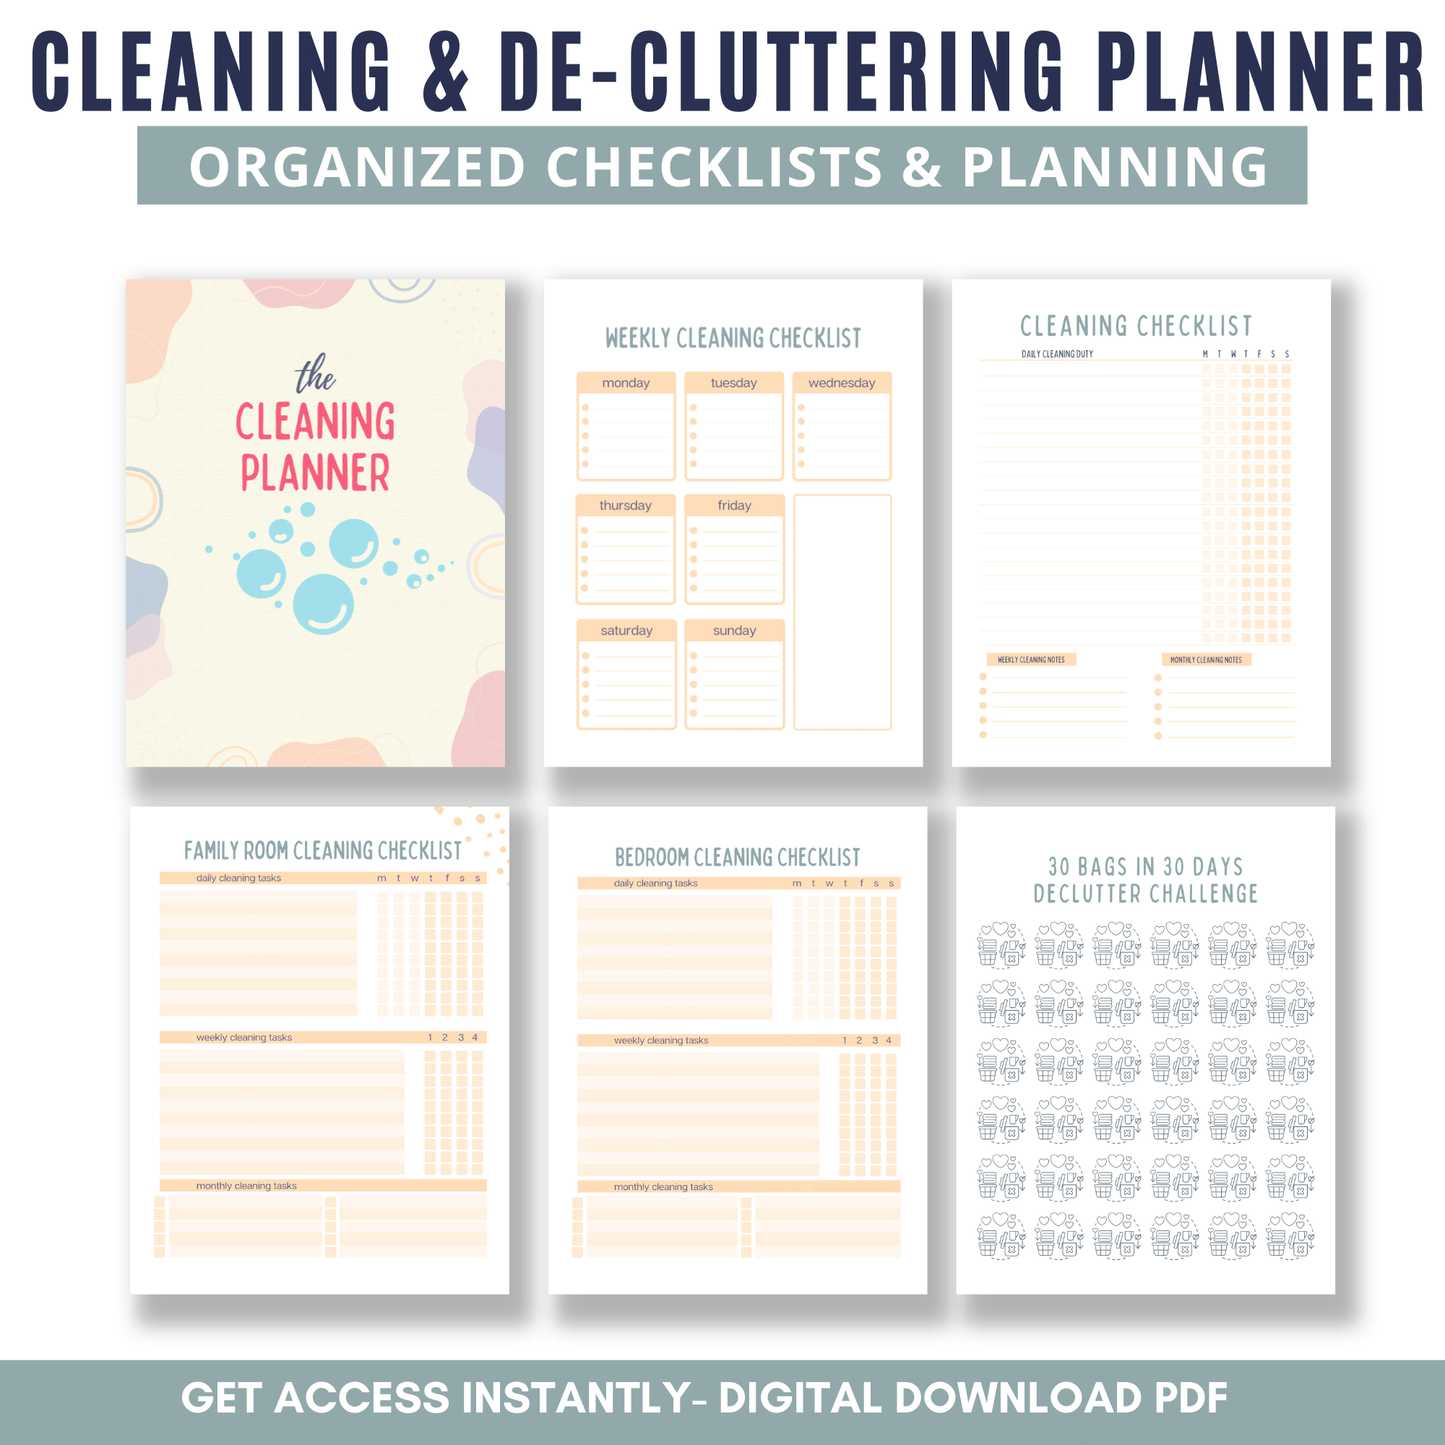 Cleaning & DeCluttering Planner